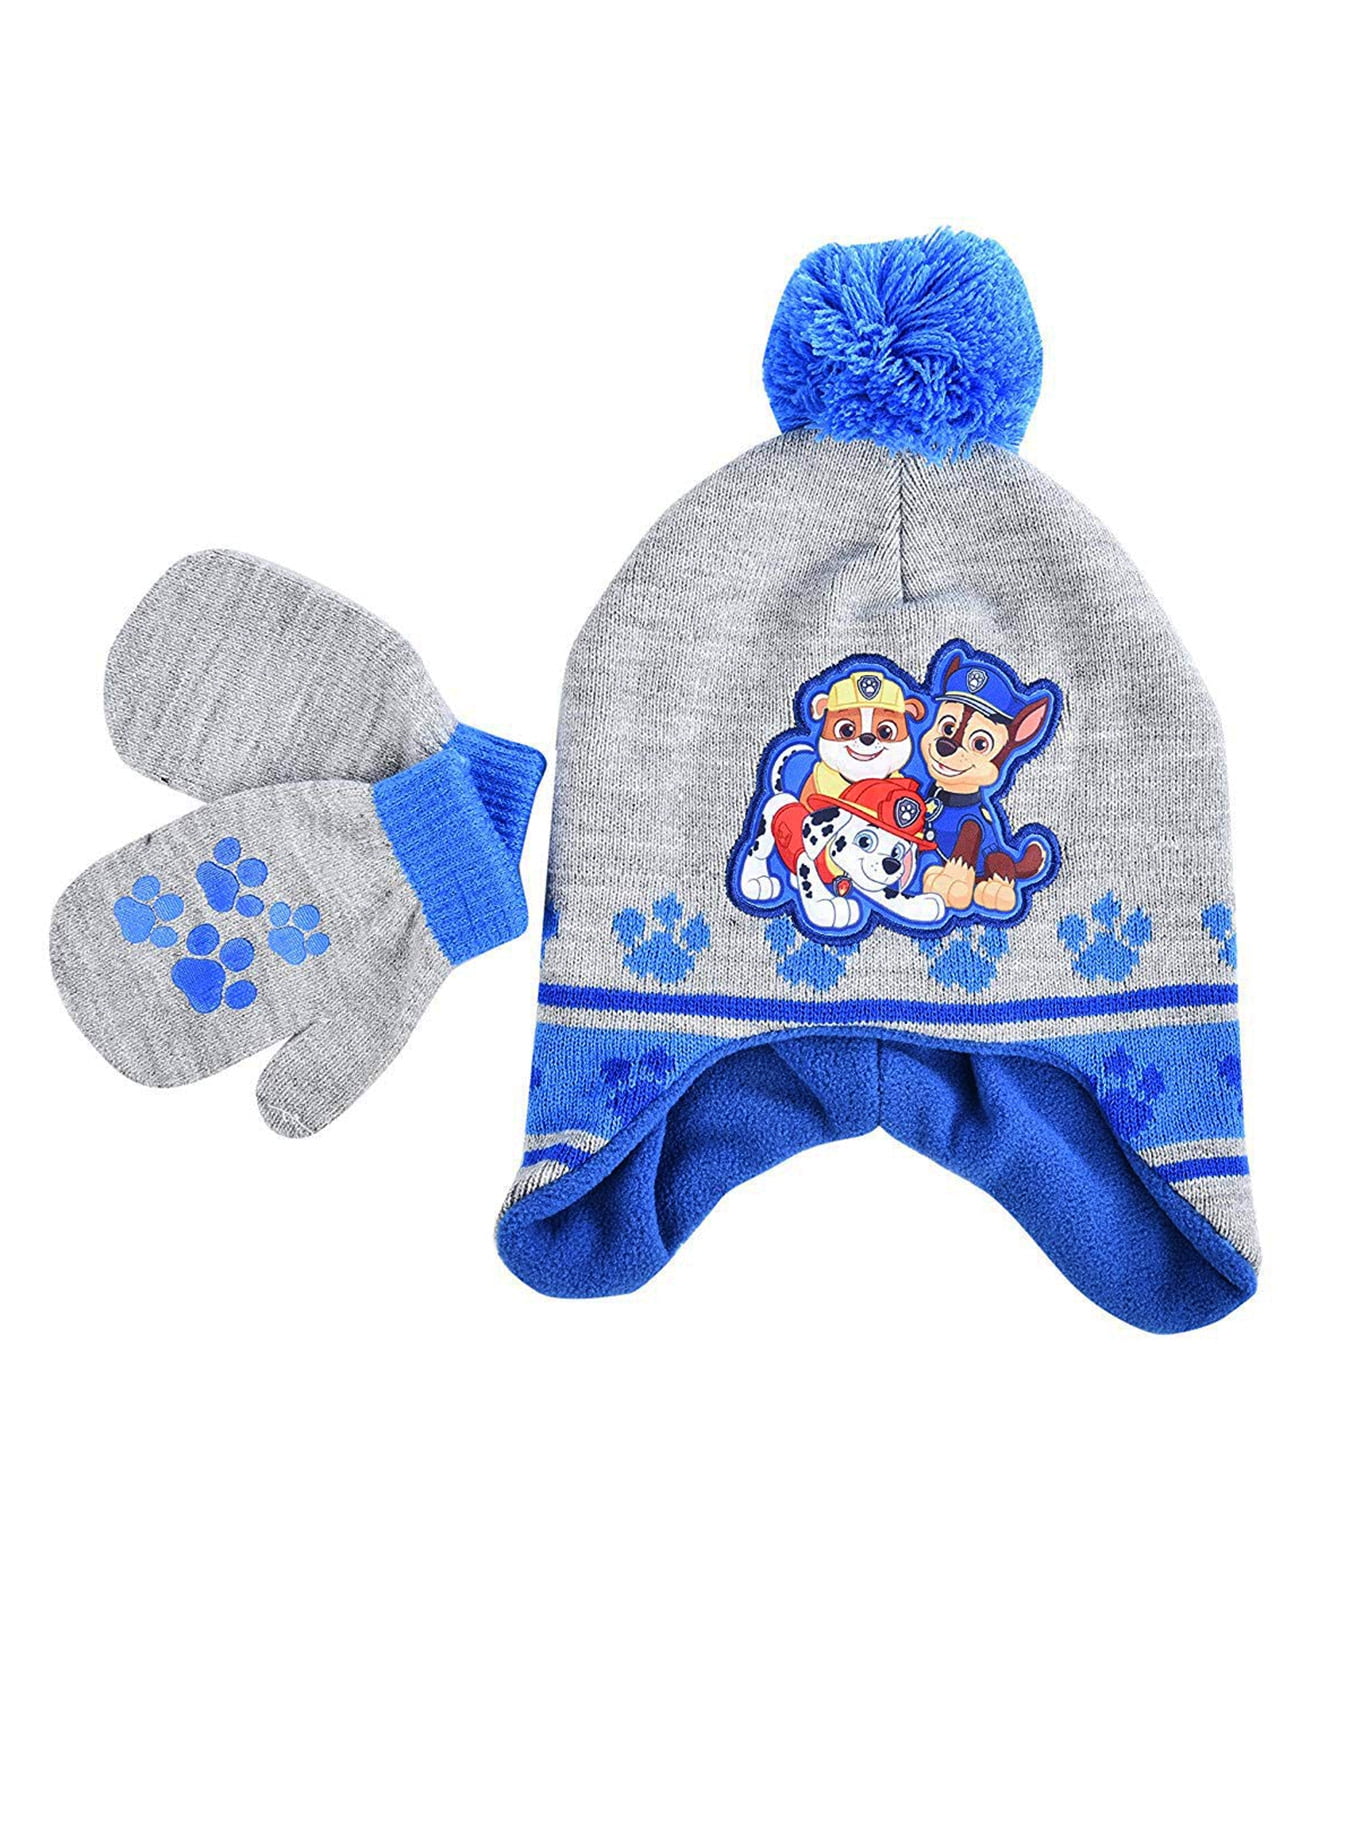 Nickelodeon Boys Toddler Paw Patrol Character Beanie Hat and Mittens Set